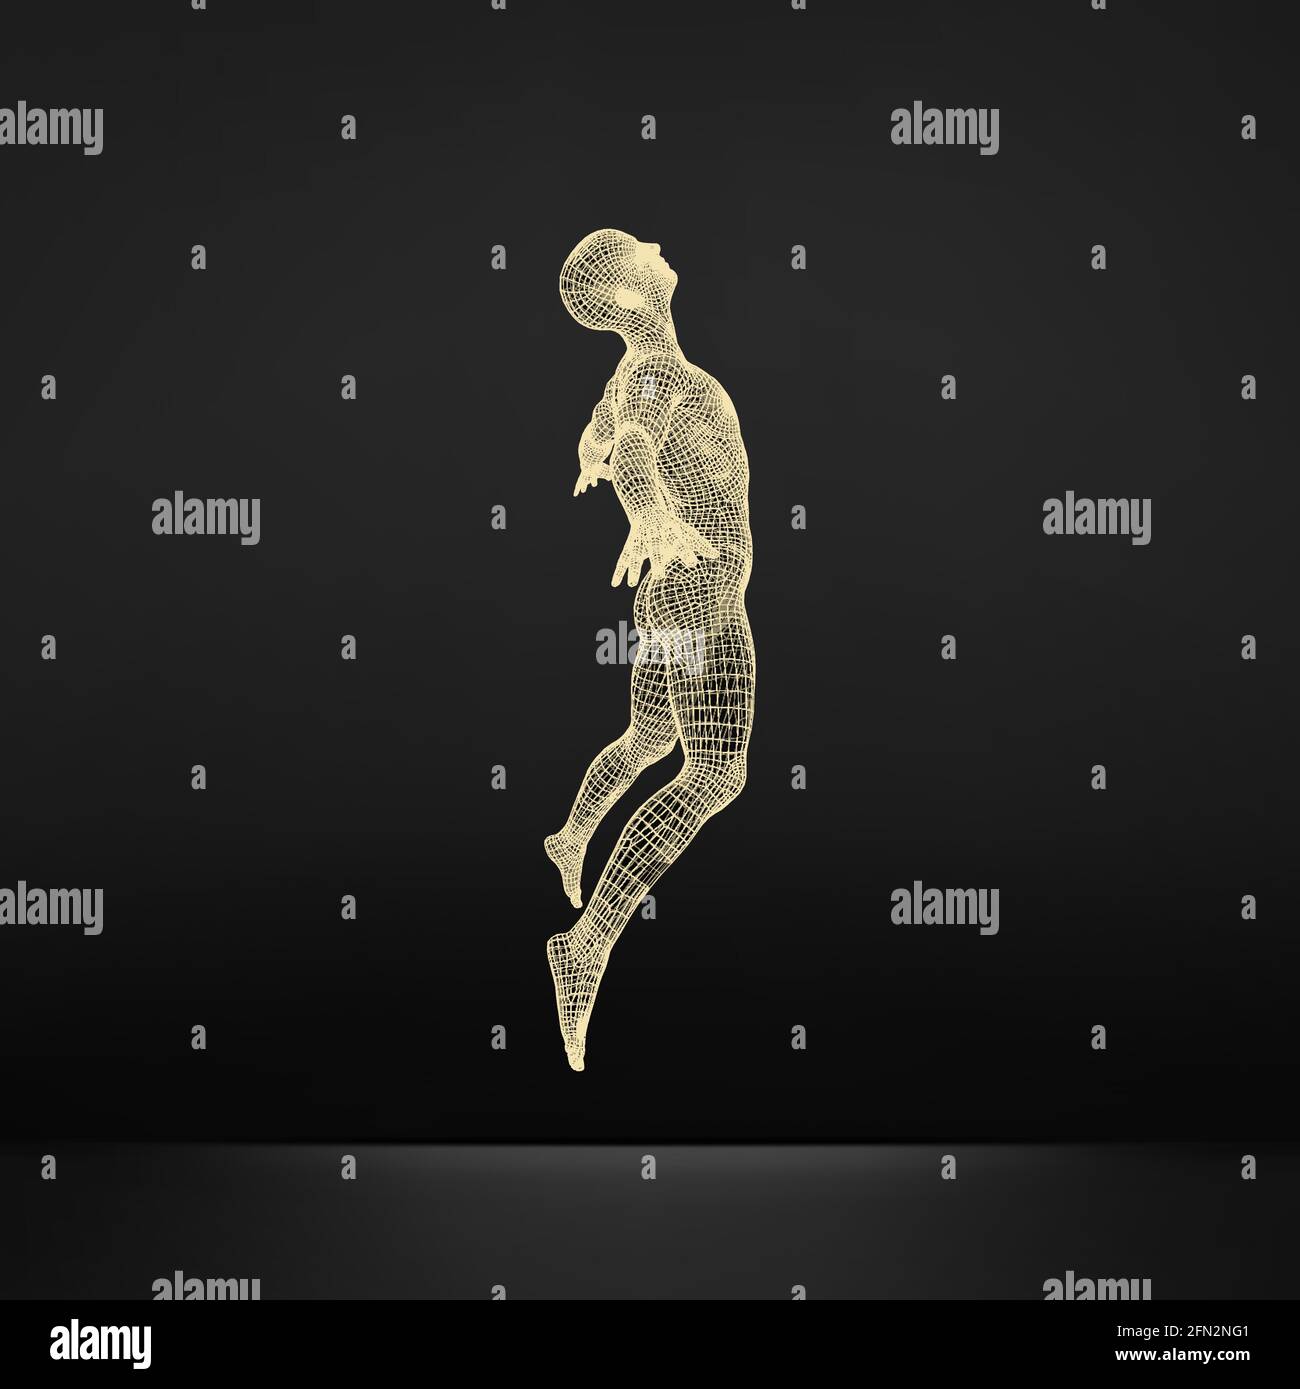 Silhouette of a Jumping Man. 3D Model of Man. Geometric Design. Polygonal Covering Skin. Human Body Wire Model. Vector Illustration. Stock Vector